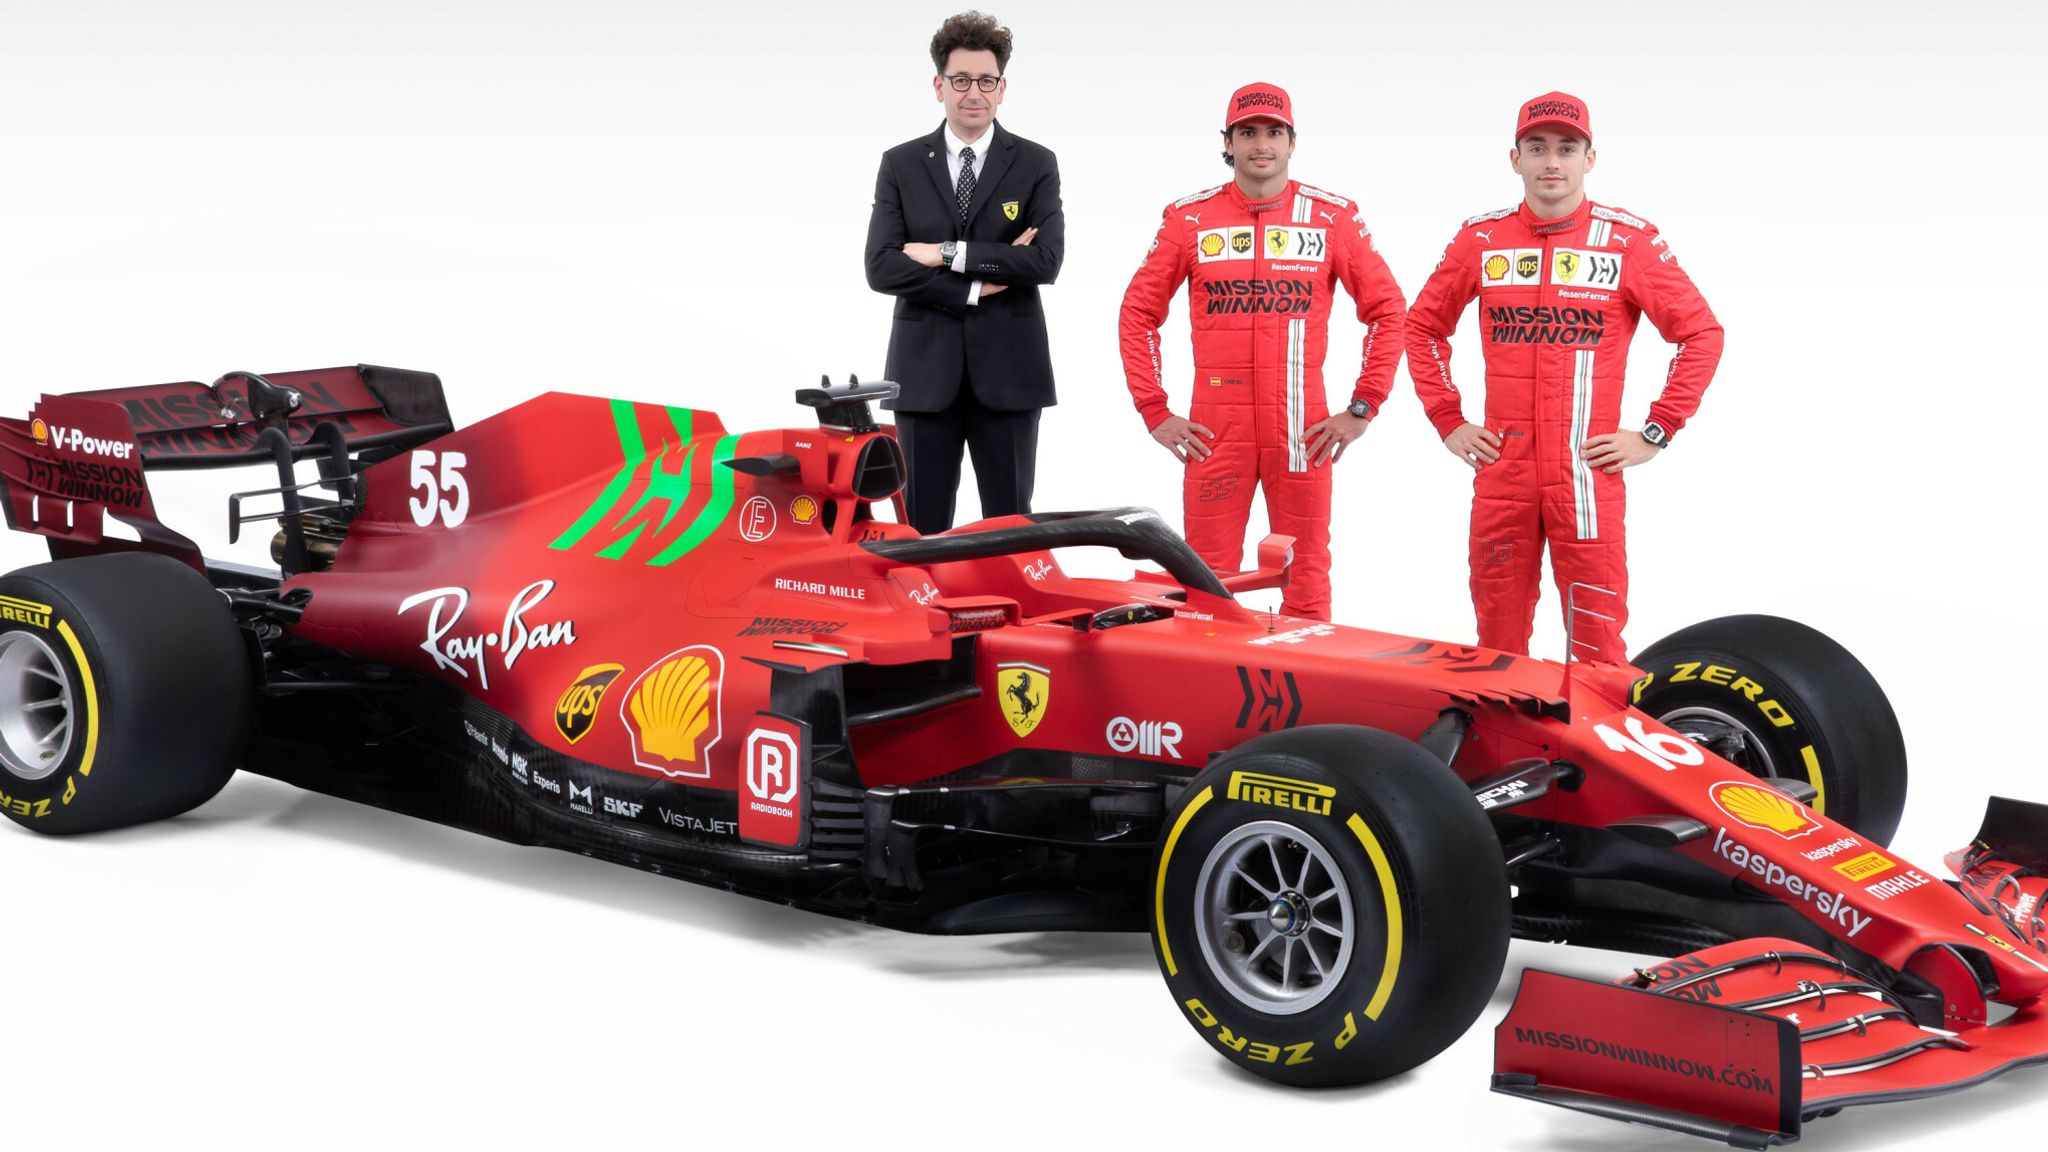 Ferrari Launch Sf21 Car For 21 Formula 1 Season With New Engine And Hope Of Much Improved Form F1 News